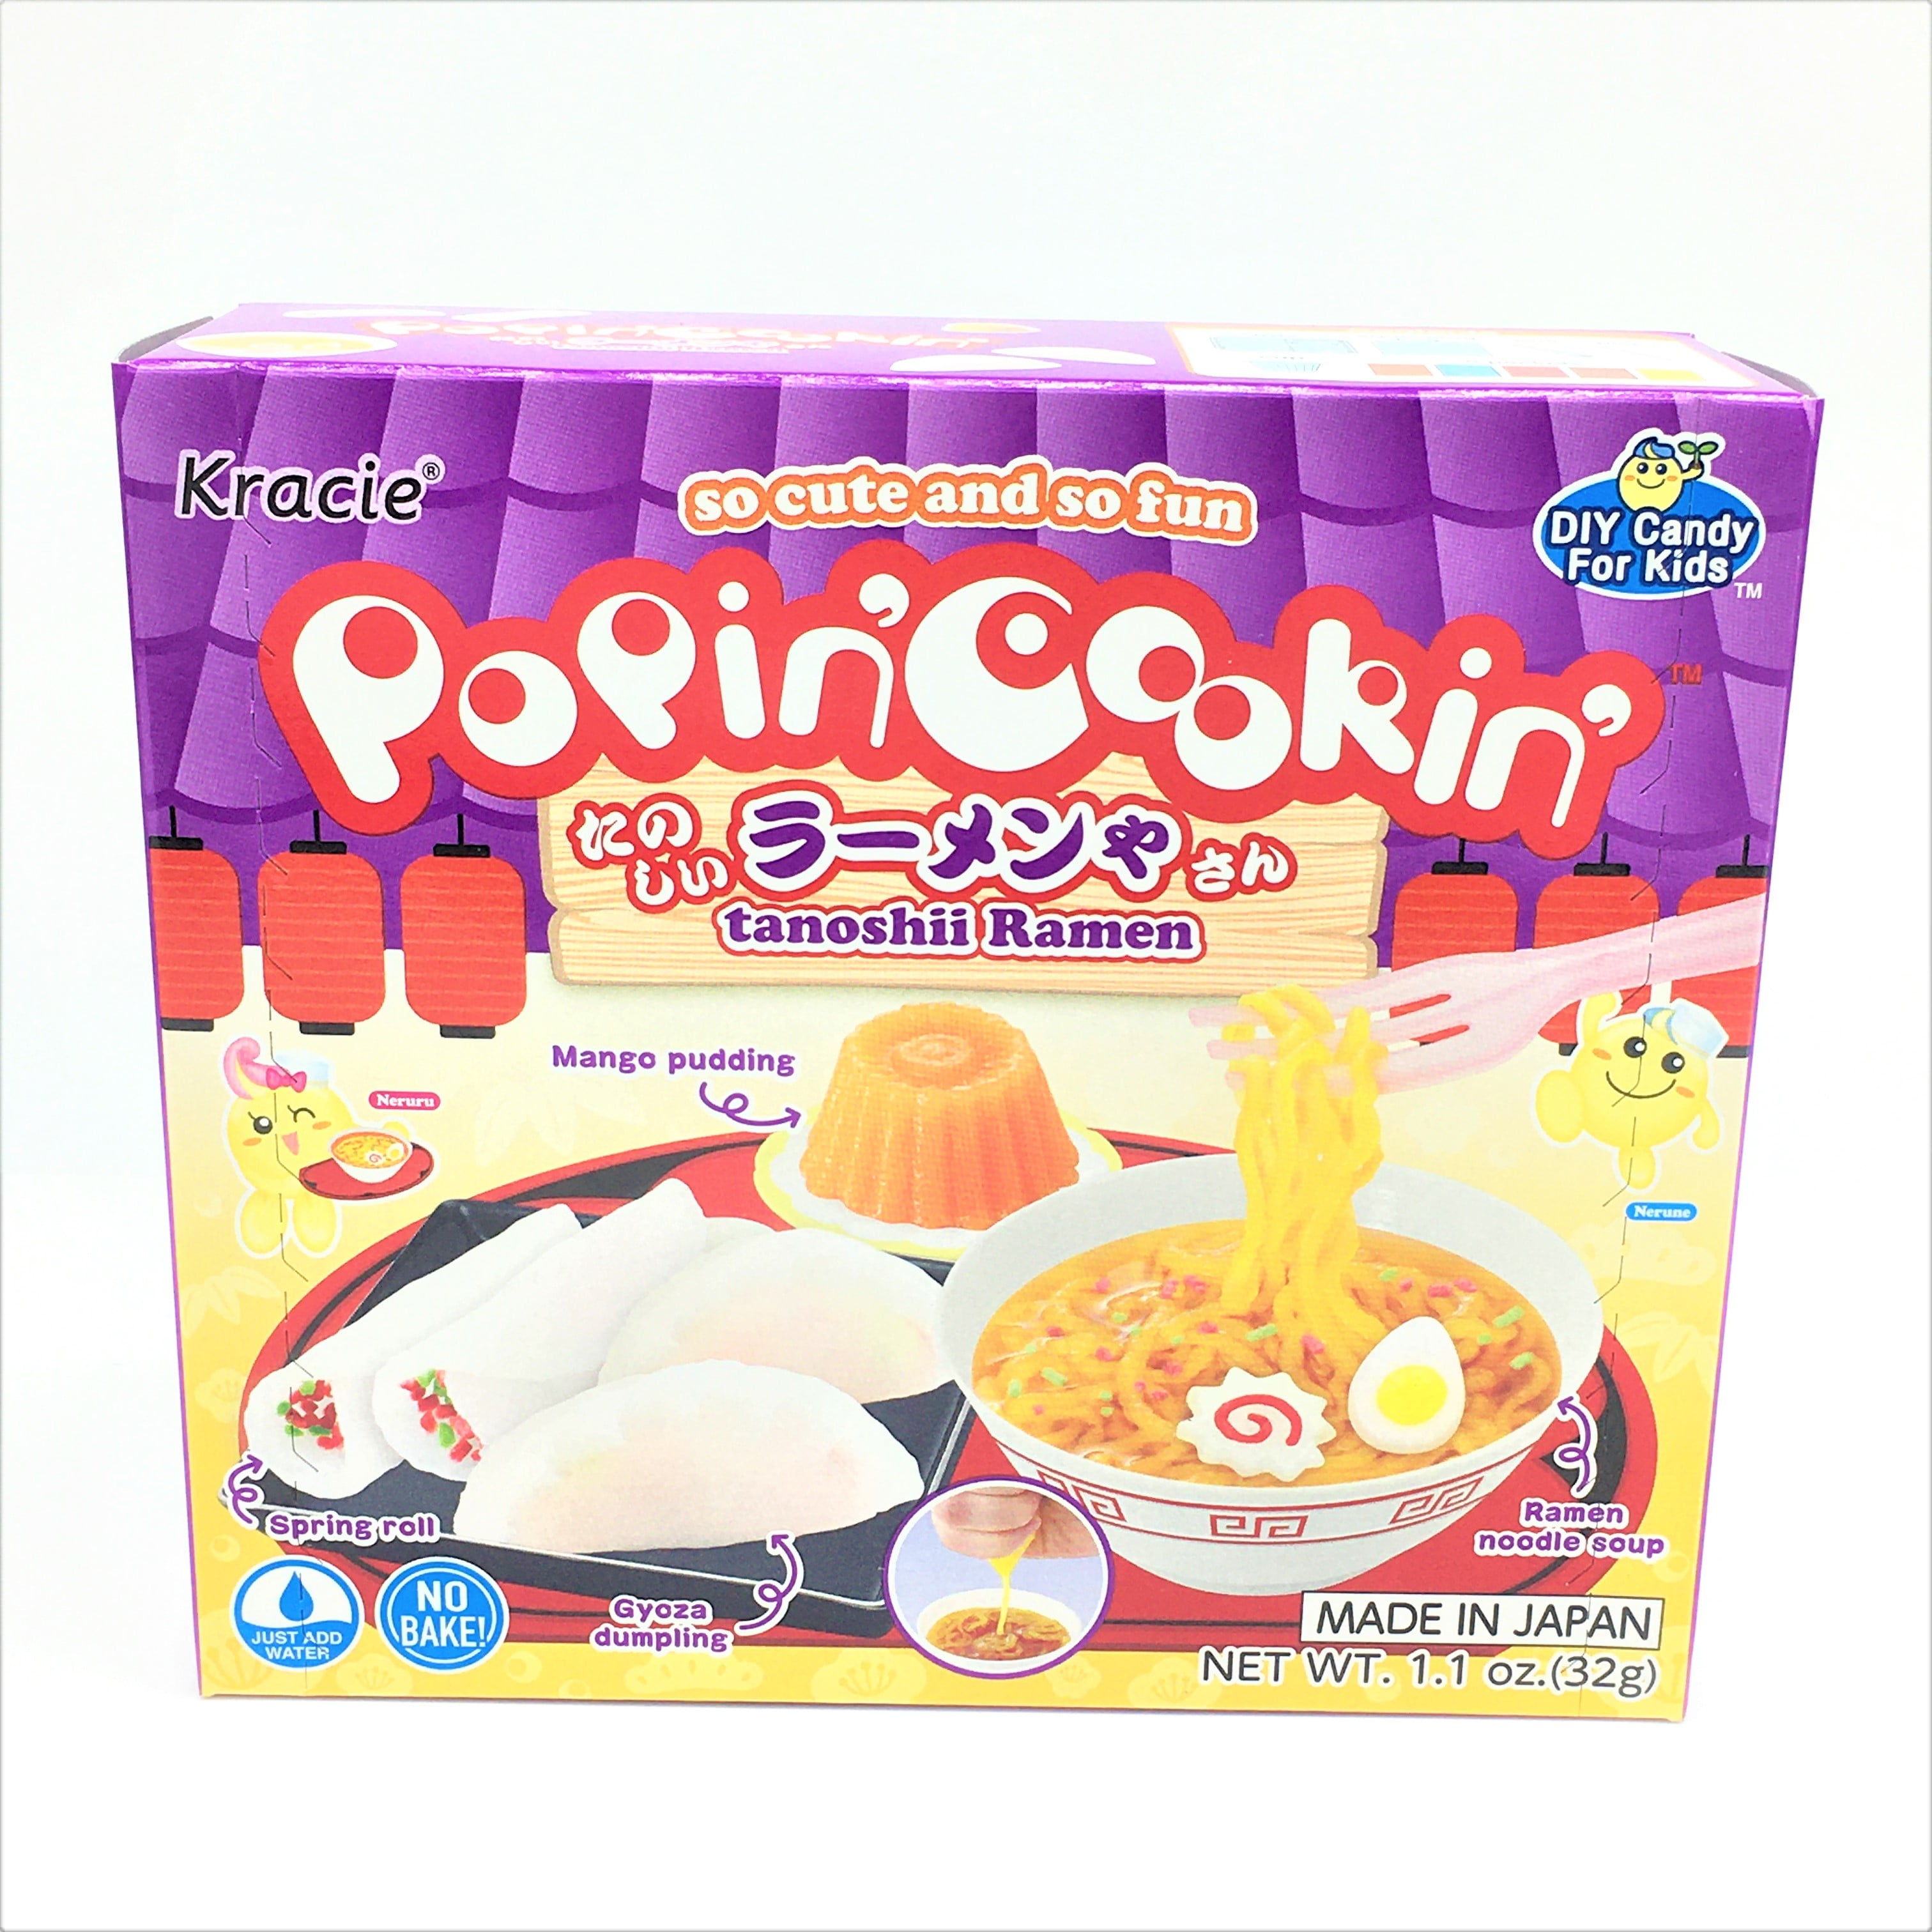 The Complete List of Popin' Cookin' Kits – Japan Candy Store